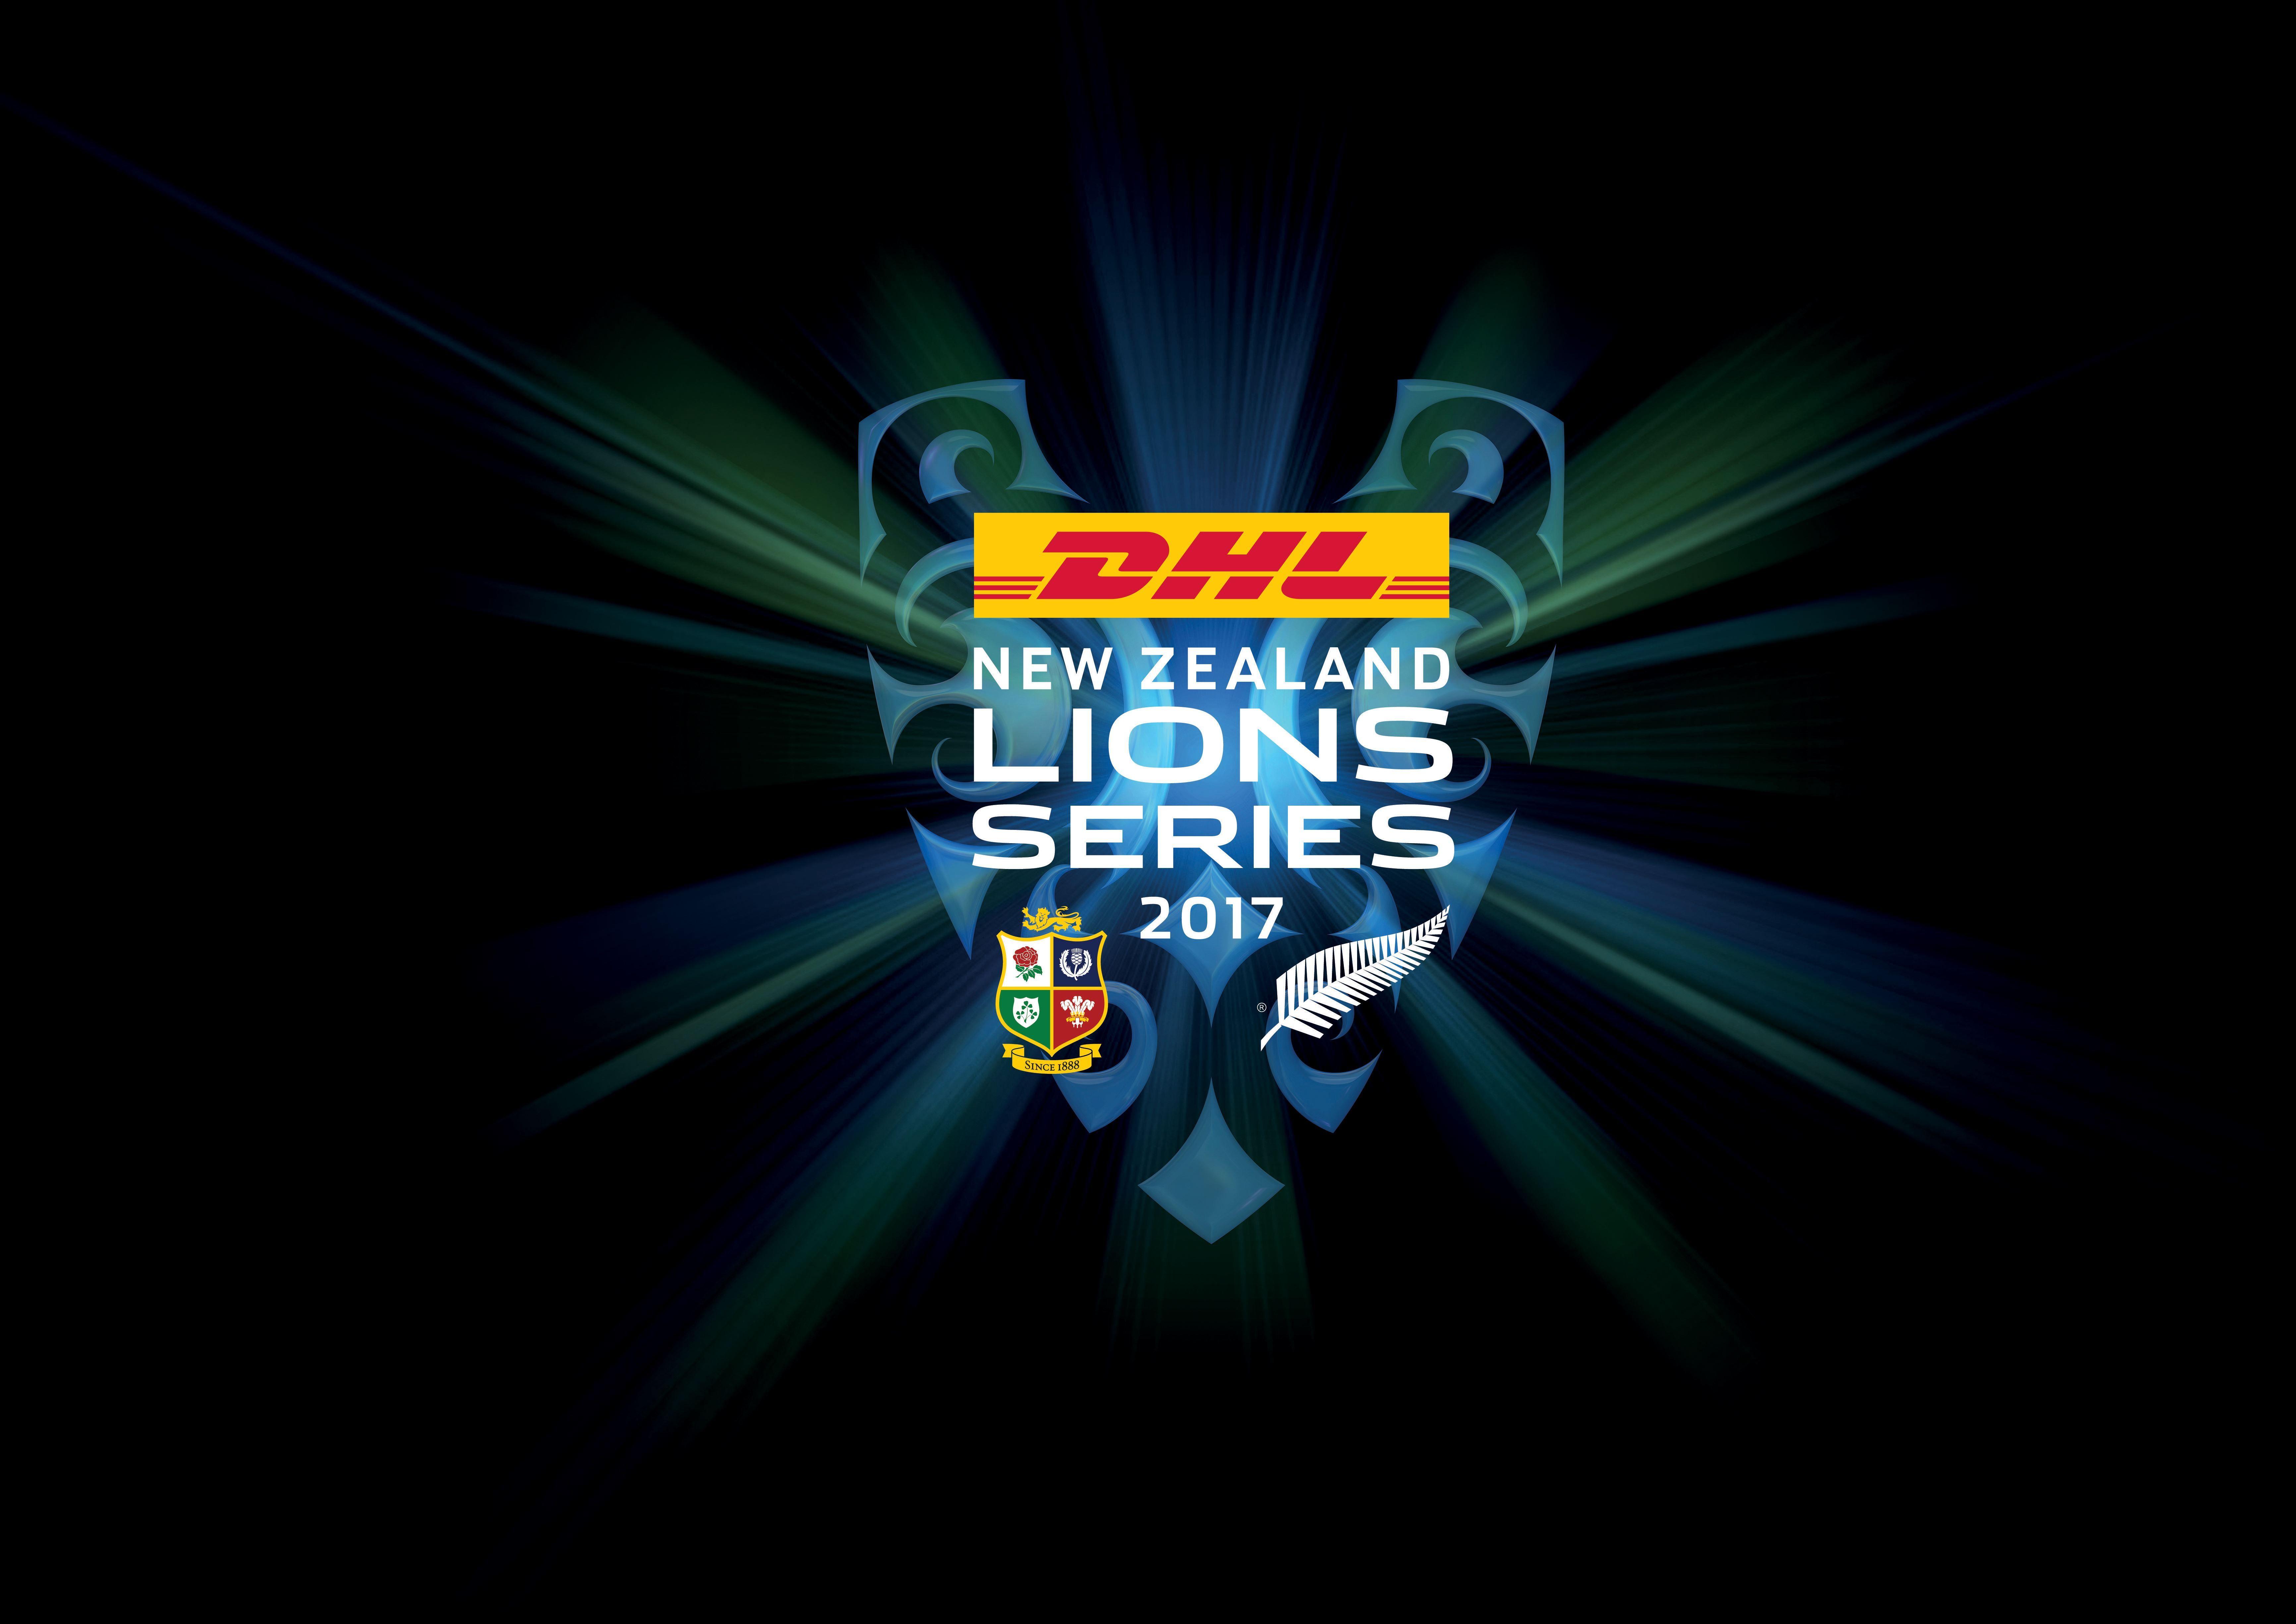 DHL New Logo - Delivering the DHL New Zealand Lions Series 2017 | NZ Lions Series 2017